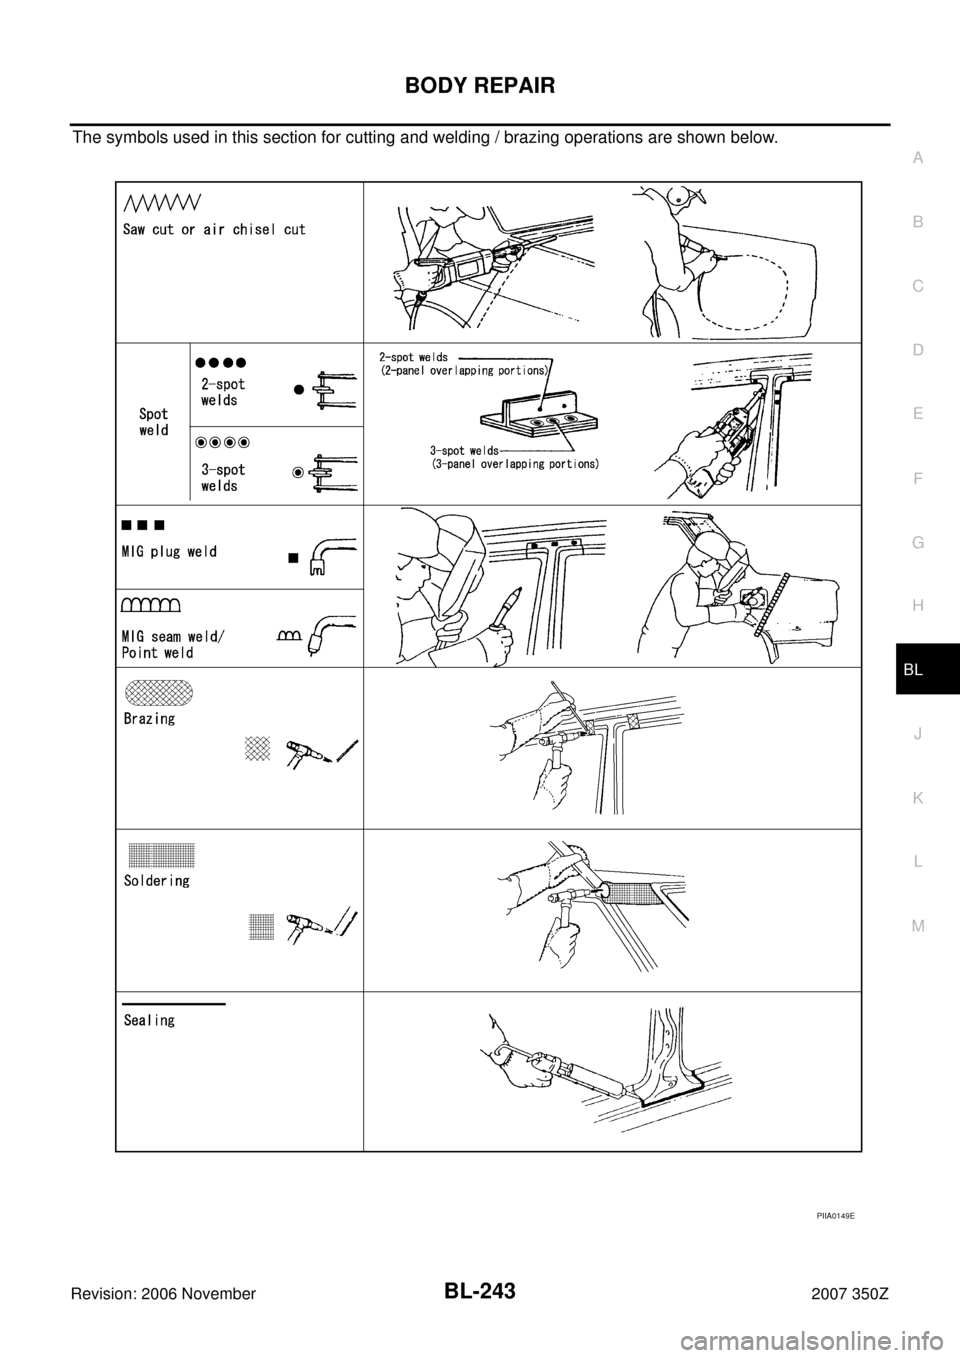 NISSAN 350Z 2007 Z33 Body, Lock And Security System Workshop Manual BODY REPAIR
BL-243
C
D
E
F
G
H
J
K
L
MA
B
BL
Revision: 2006 November2007 350Z
The symbols used in this section for cutting and welding / brazing operations are shown below.
PIIA0149E 